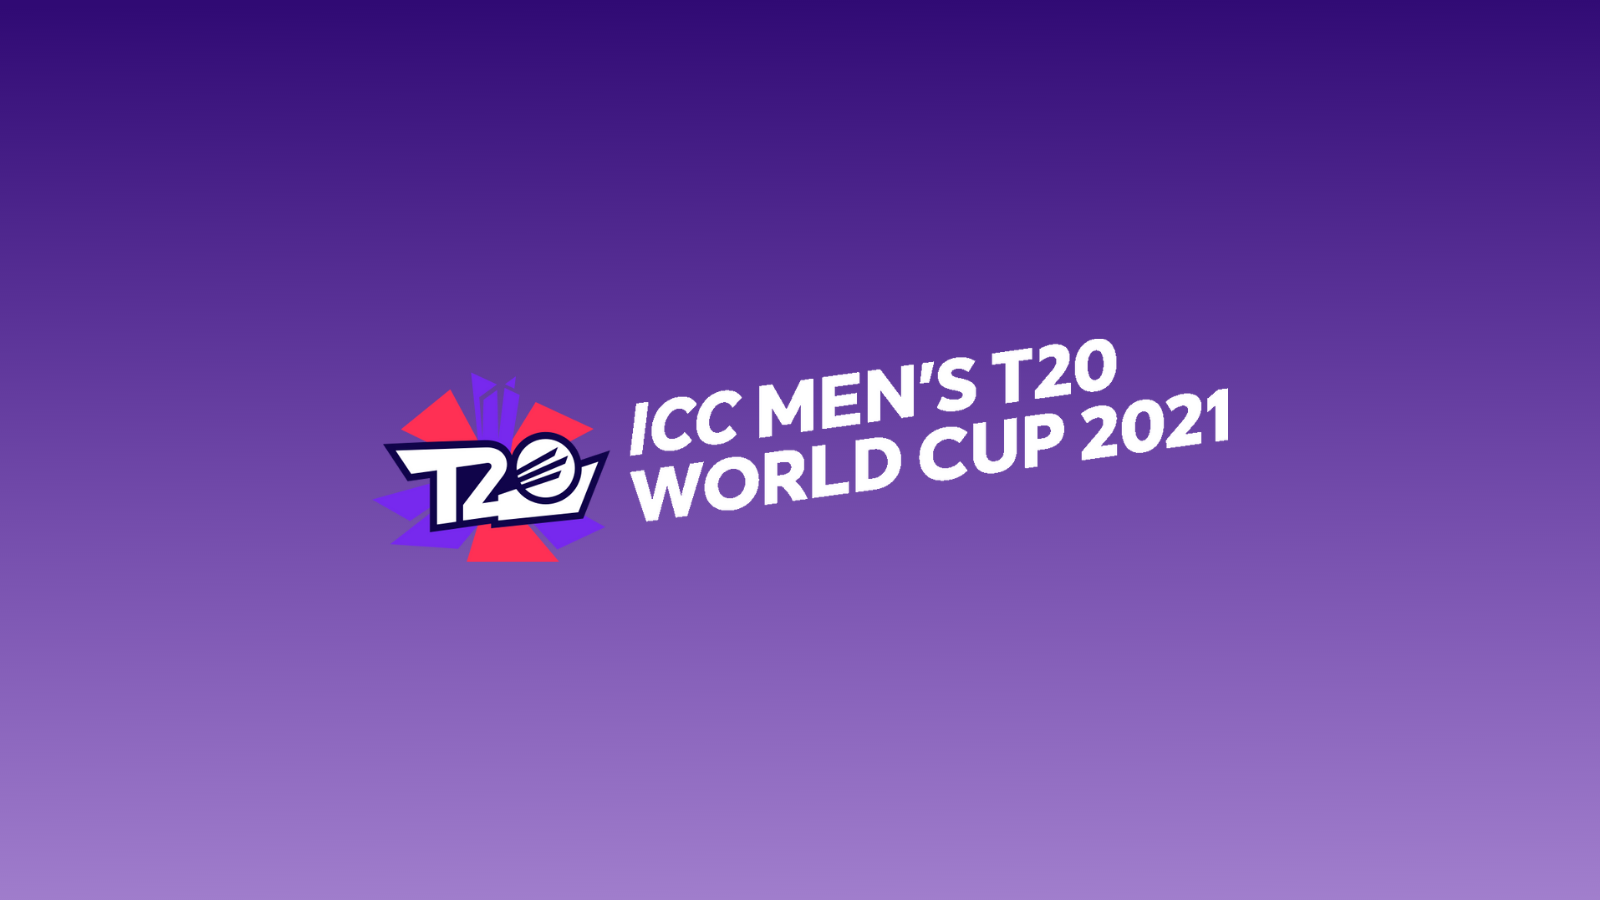 How to Watch ICC T20 World Cup 2021 Without Cable